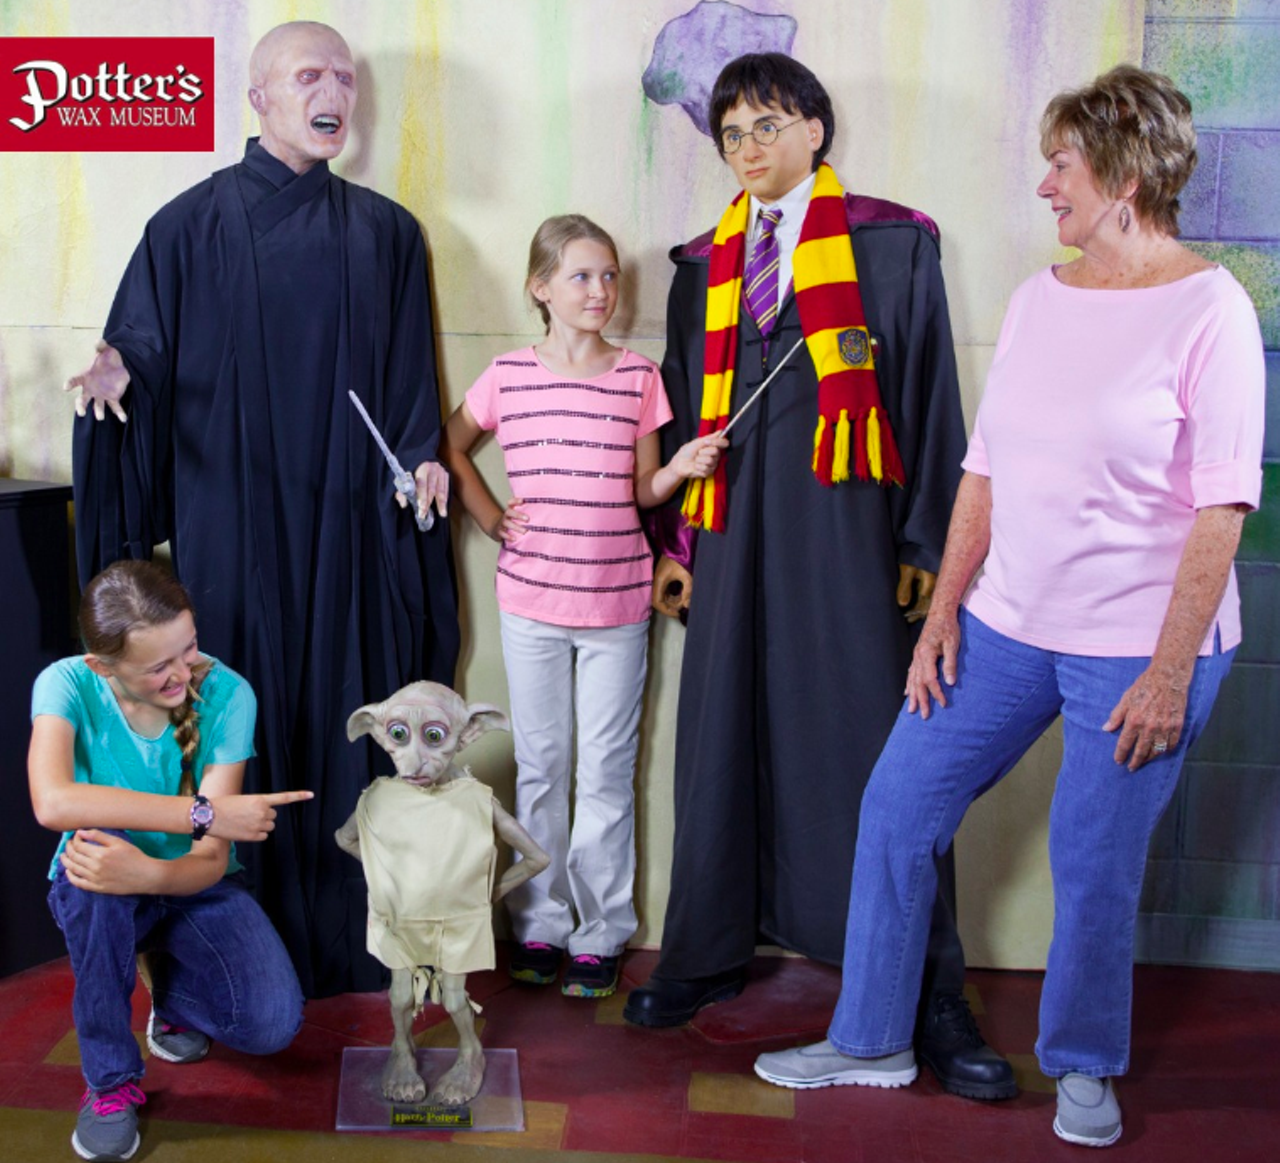 Potter’s Wax Museum
31 Orange St., St. Augustine
With more than 160 sculptures covering a wide range of real and fictional figures, including politicians, entertainers, horror characters, historical personalities and athletes, Potter's is definitely a (maybe kind of creepy?) sight.